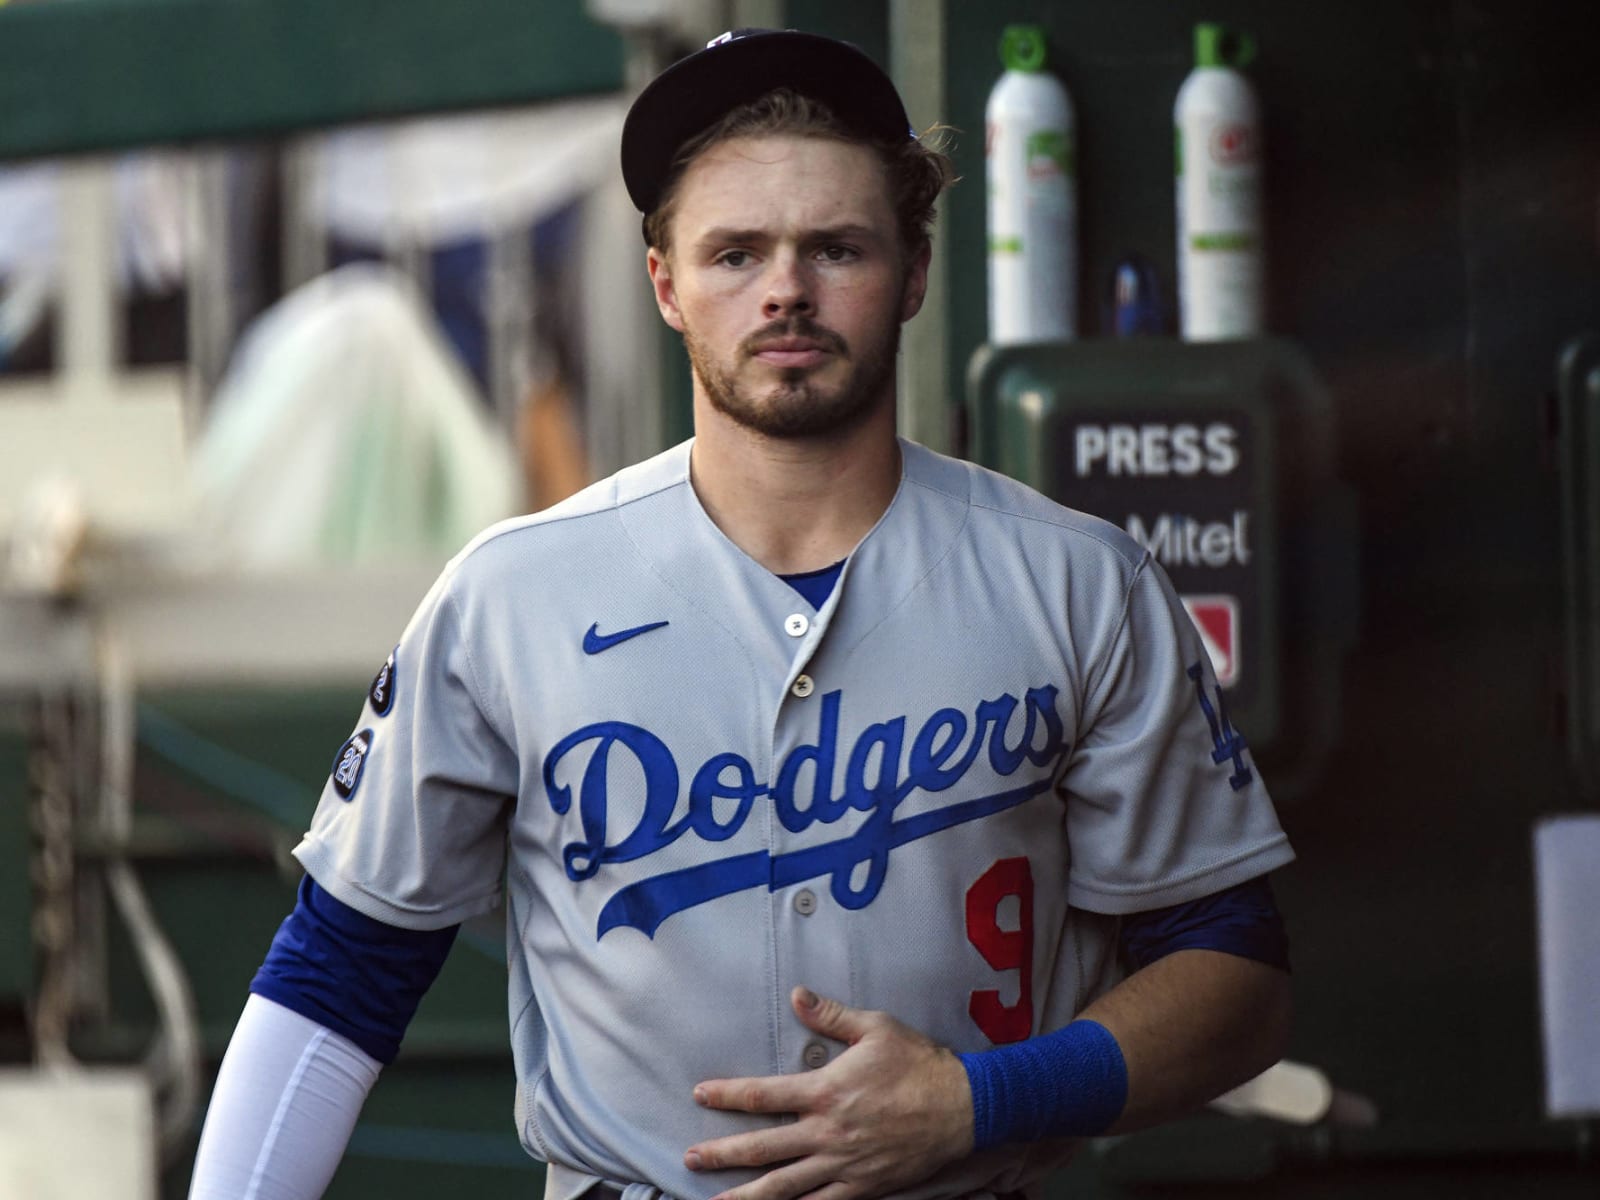 How Gavin Lux overcame mental hurdles, broke through with Dodgers